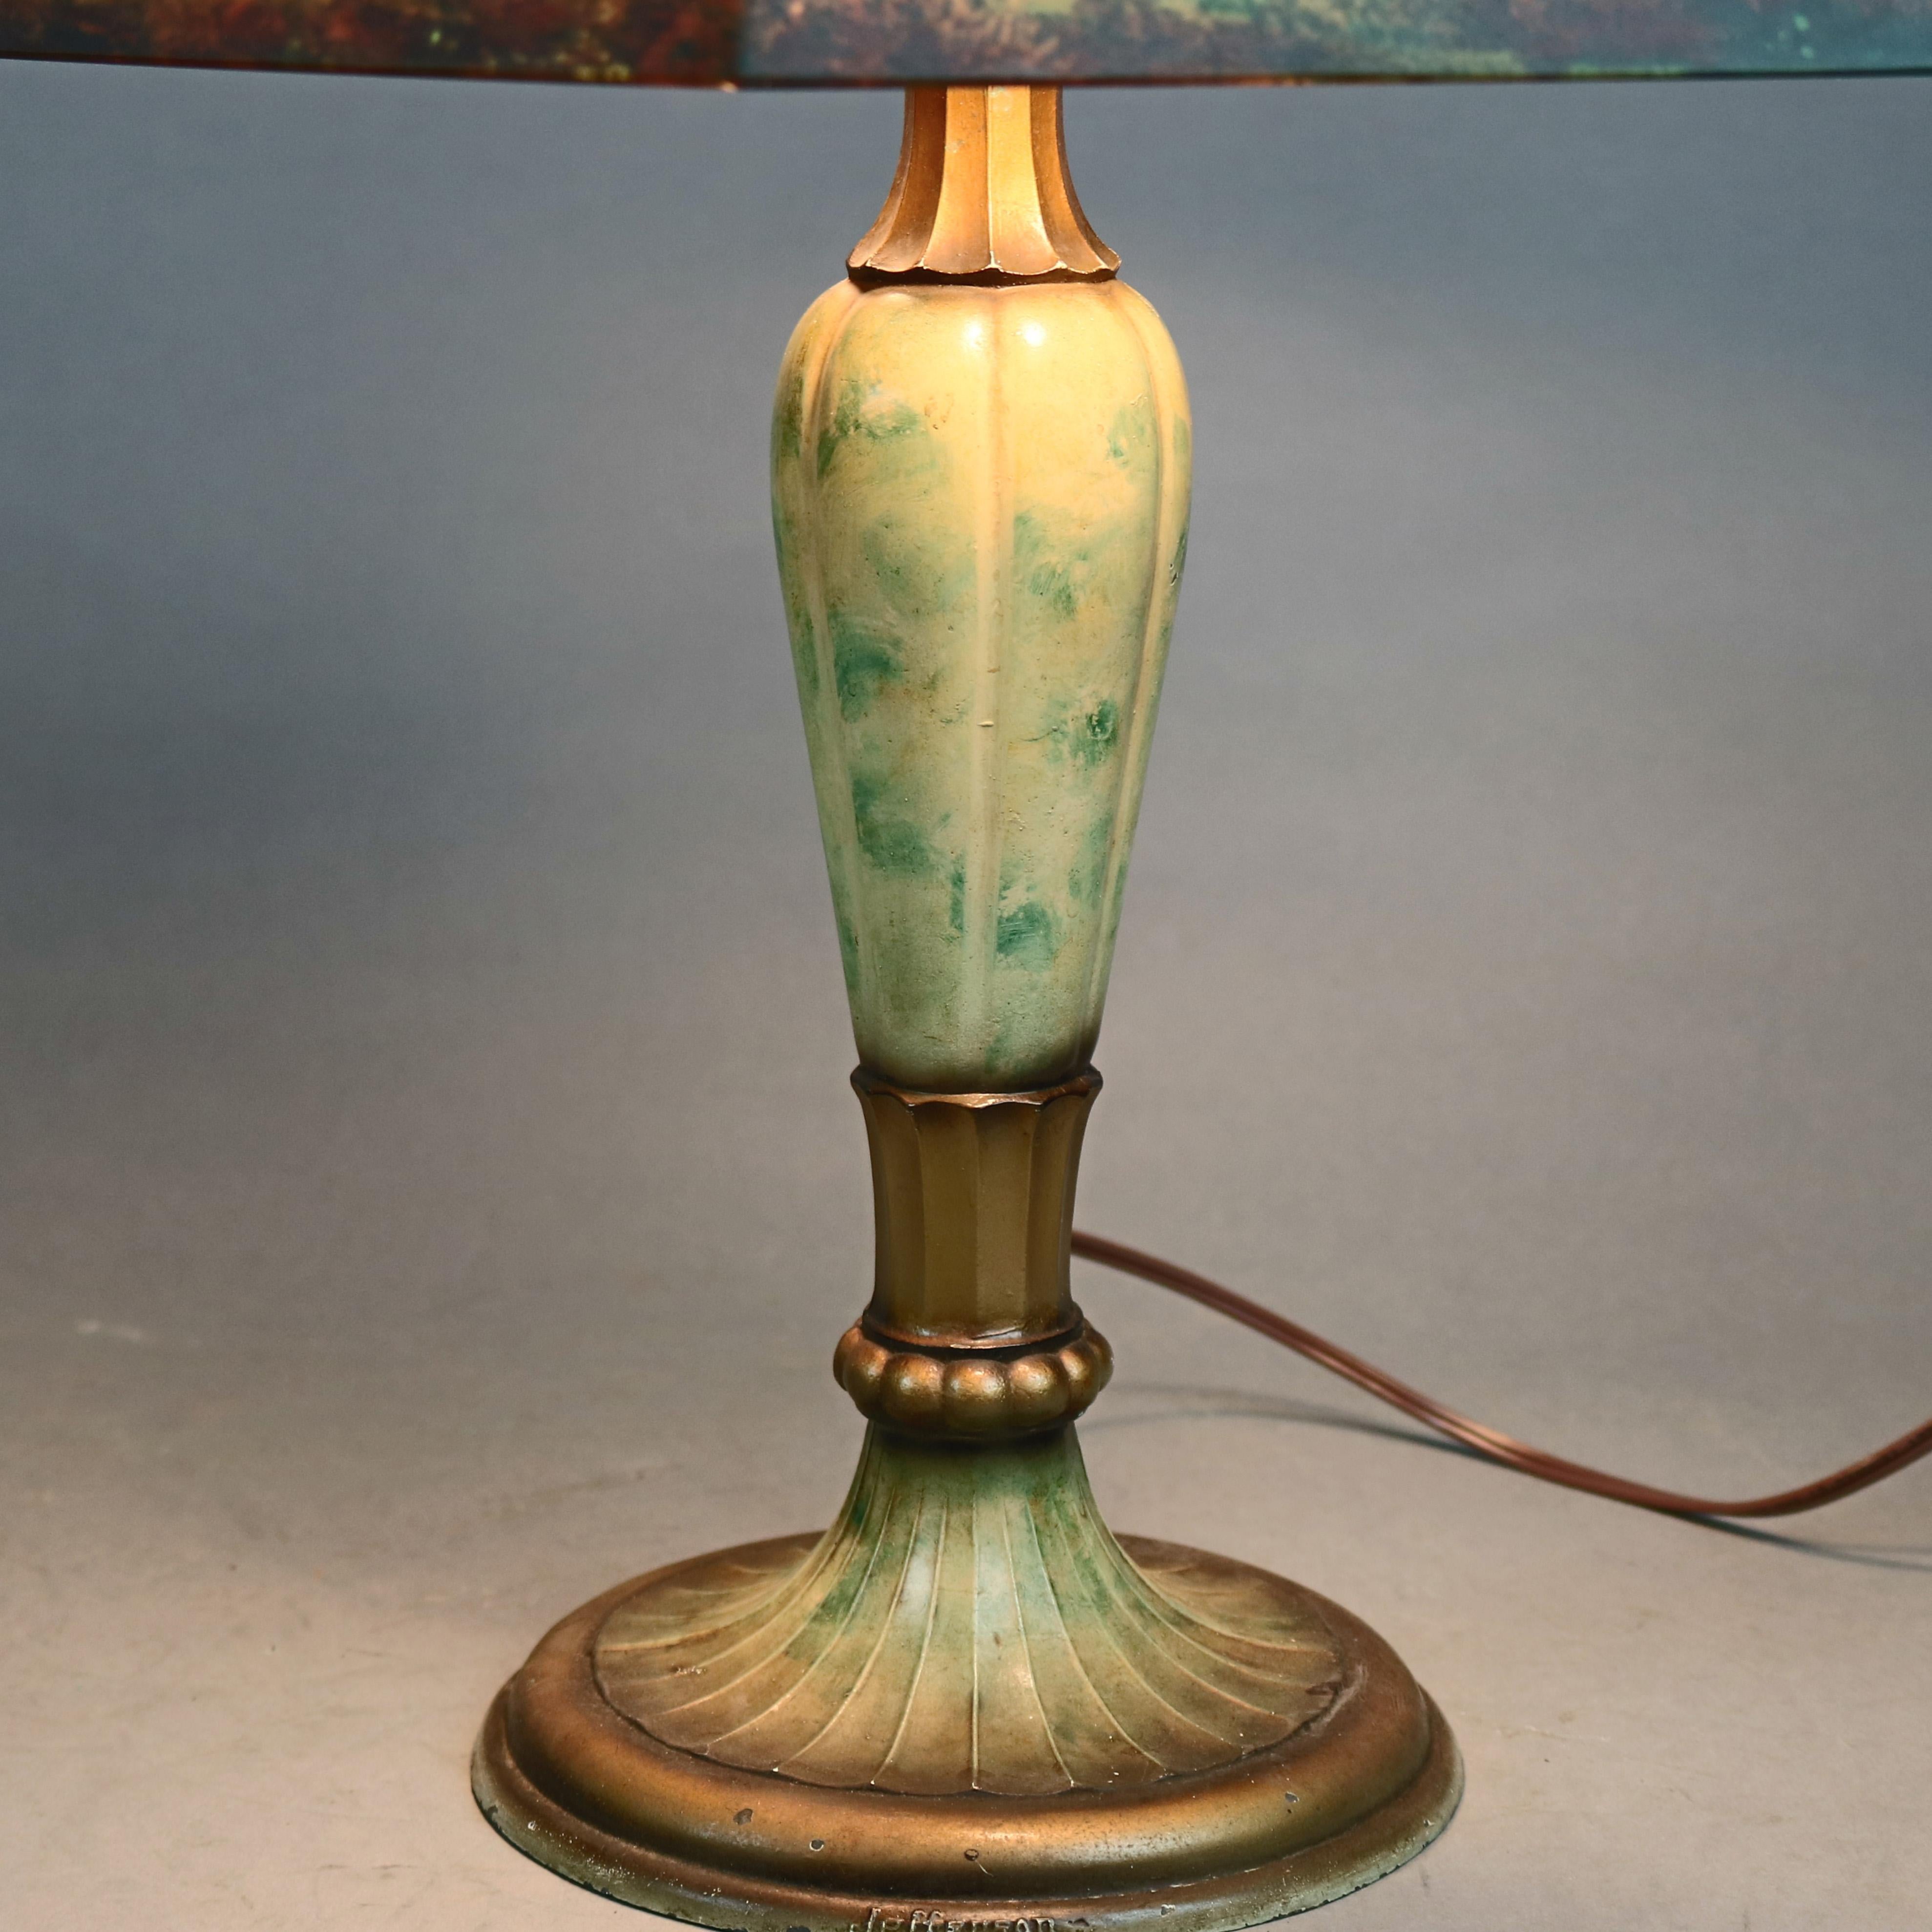 An antique Arts & Crafts Jefferson table lamp offers hexagonal reverse painted shade with landscape scene surmounting double socket base, circa 1920

Measures: 22